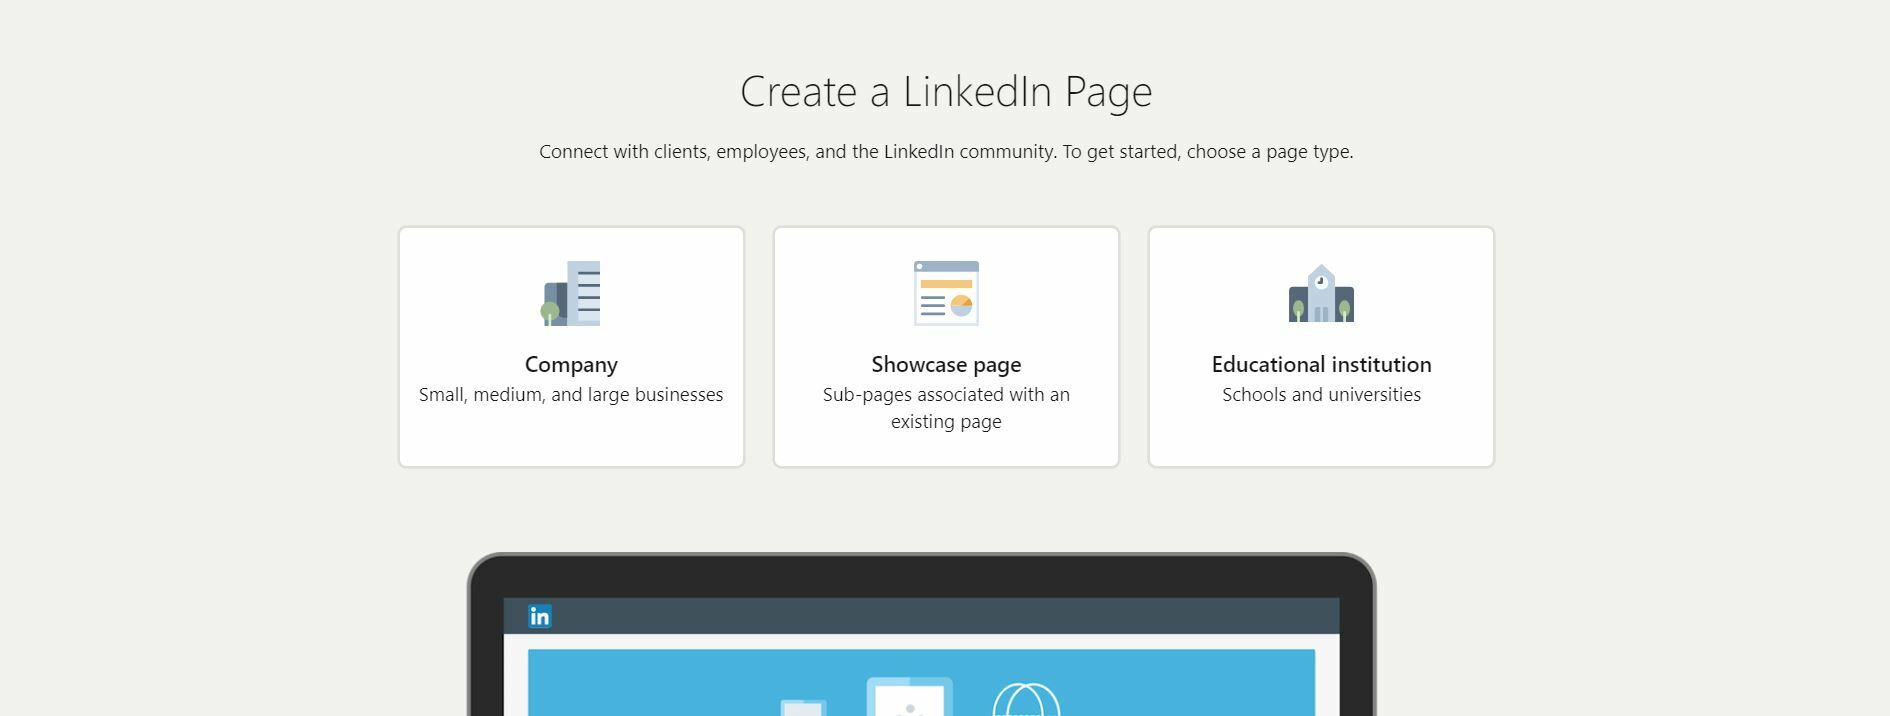 Creating a LinkedIn Business Page.